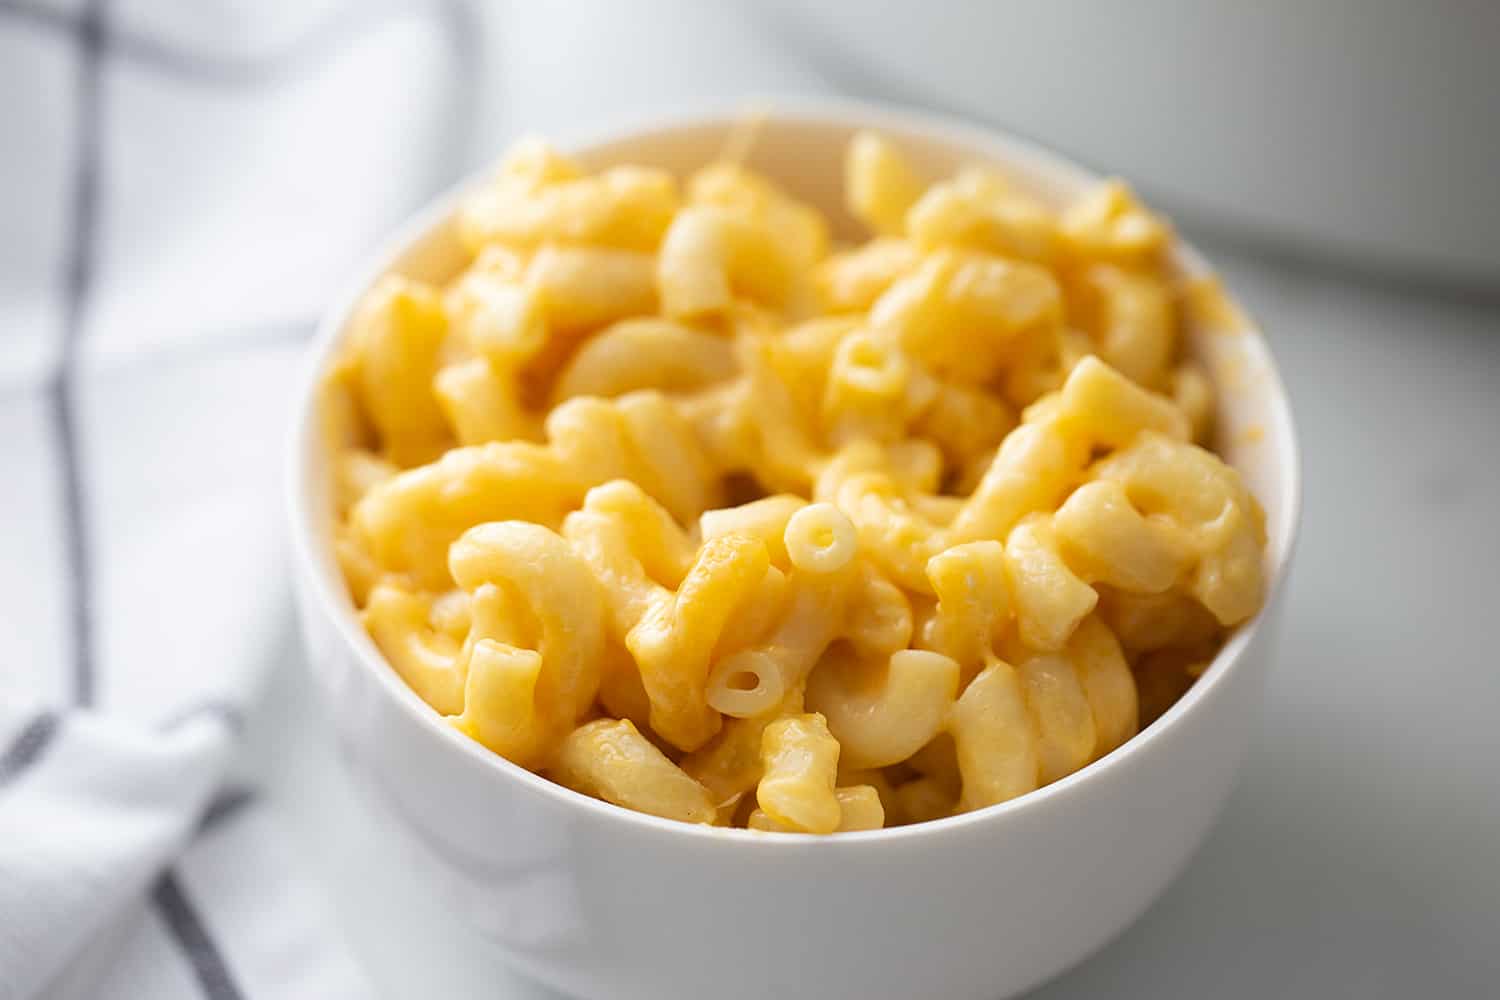 Easy Slow Cooker Mac and Cheese - Even the pickiest eaters will love easy slow cooker mac and cheese: a combo of sharp cheddar and Colby Jack plus a few surprise ingredients. #macandcheese #easyrecipe #halfscratched #slowcooker #pasta